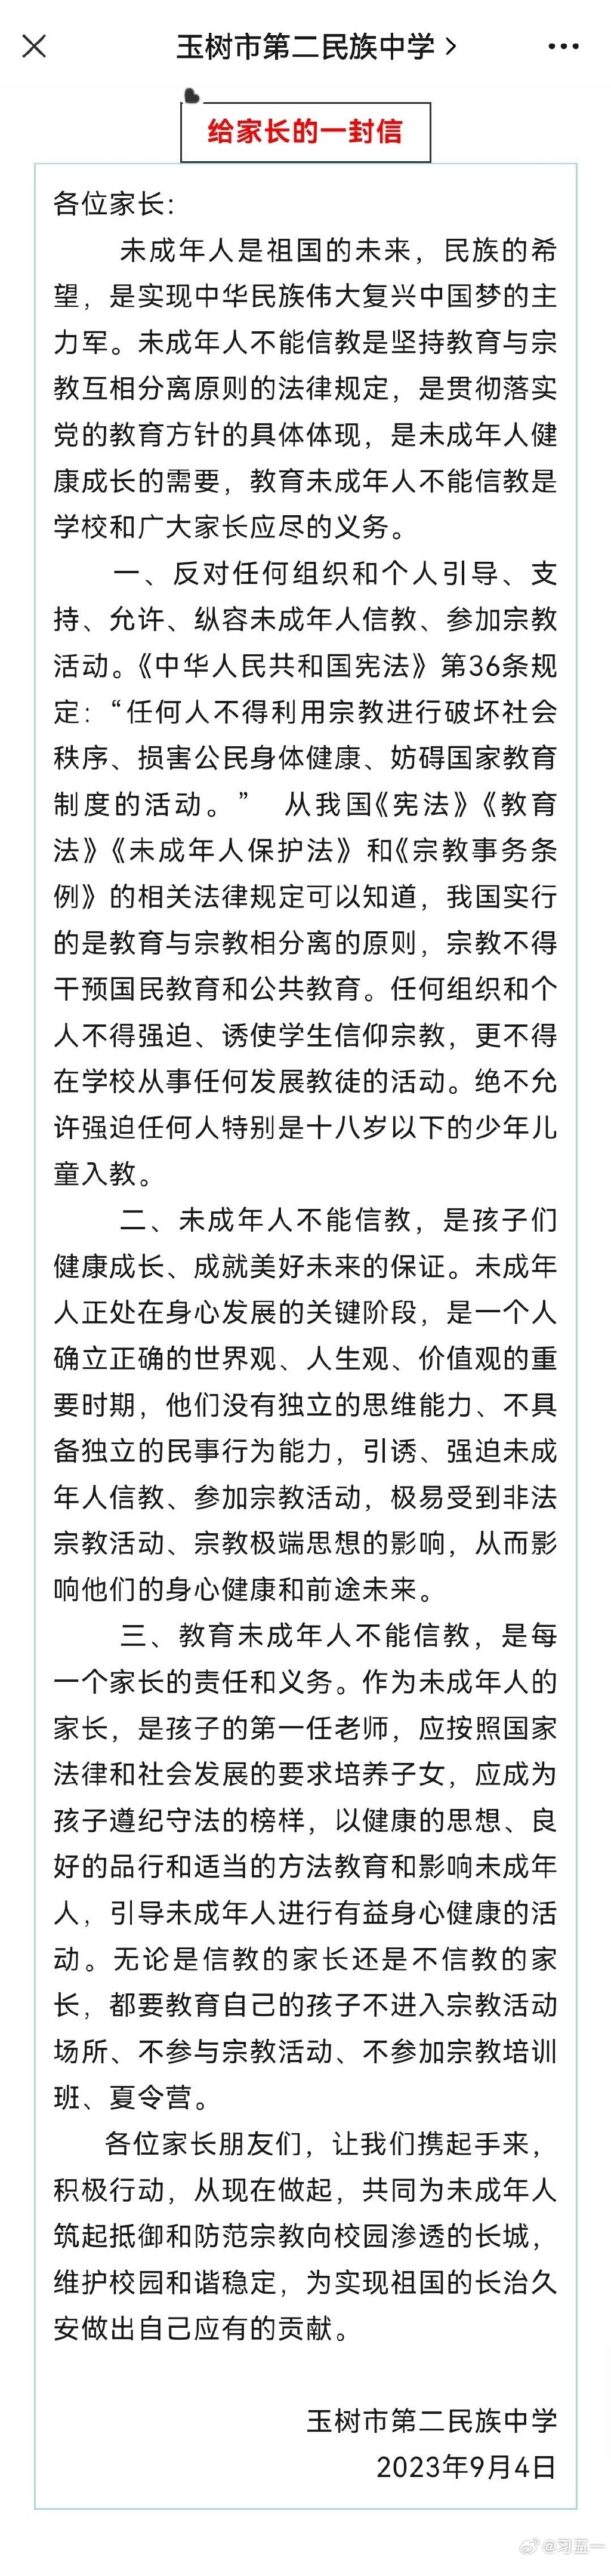 The letter sent to parents of Yushu City 2nd Ethnic Middle School.